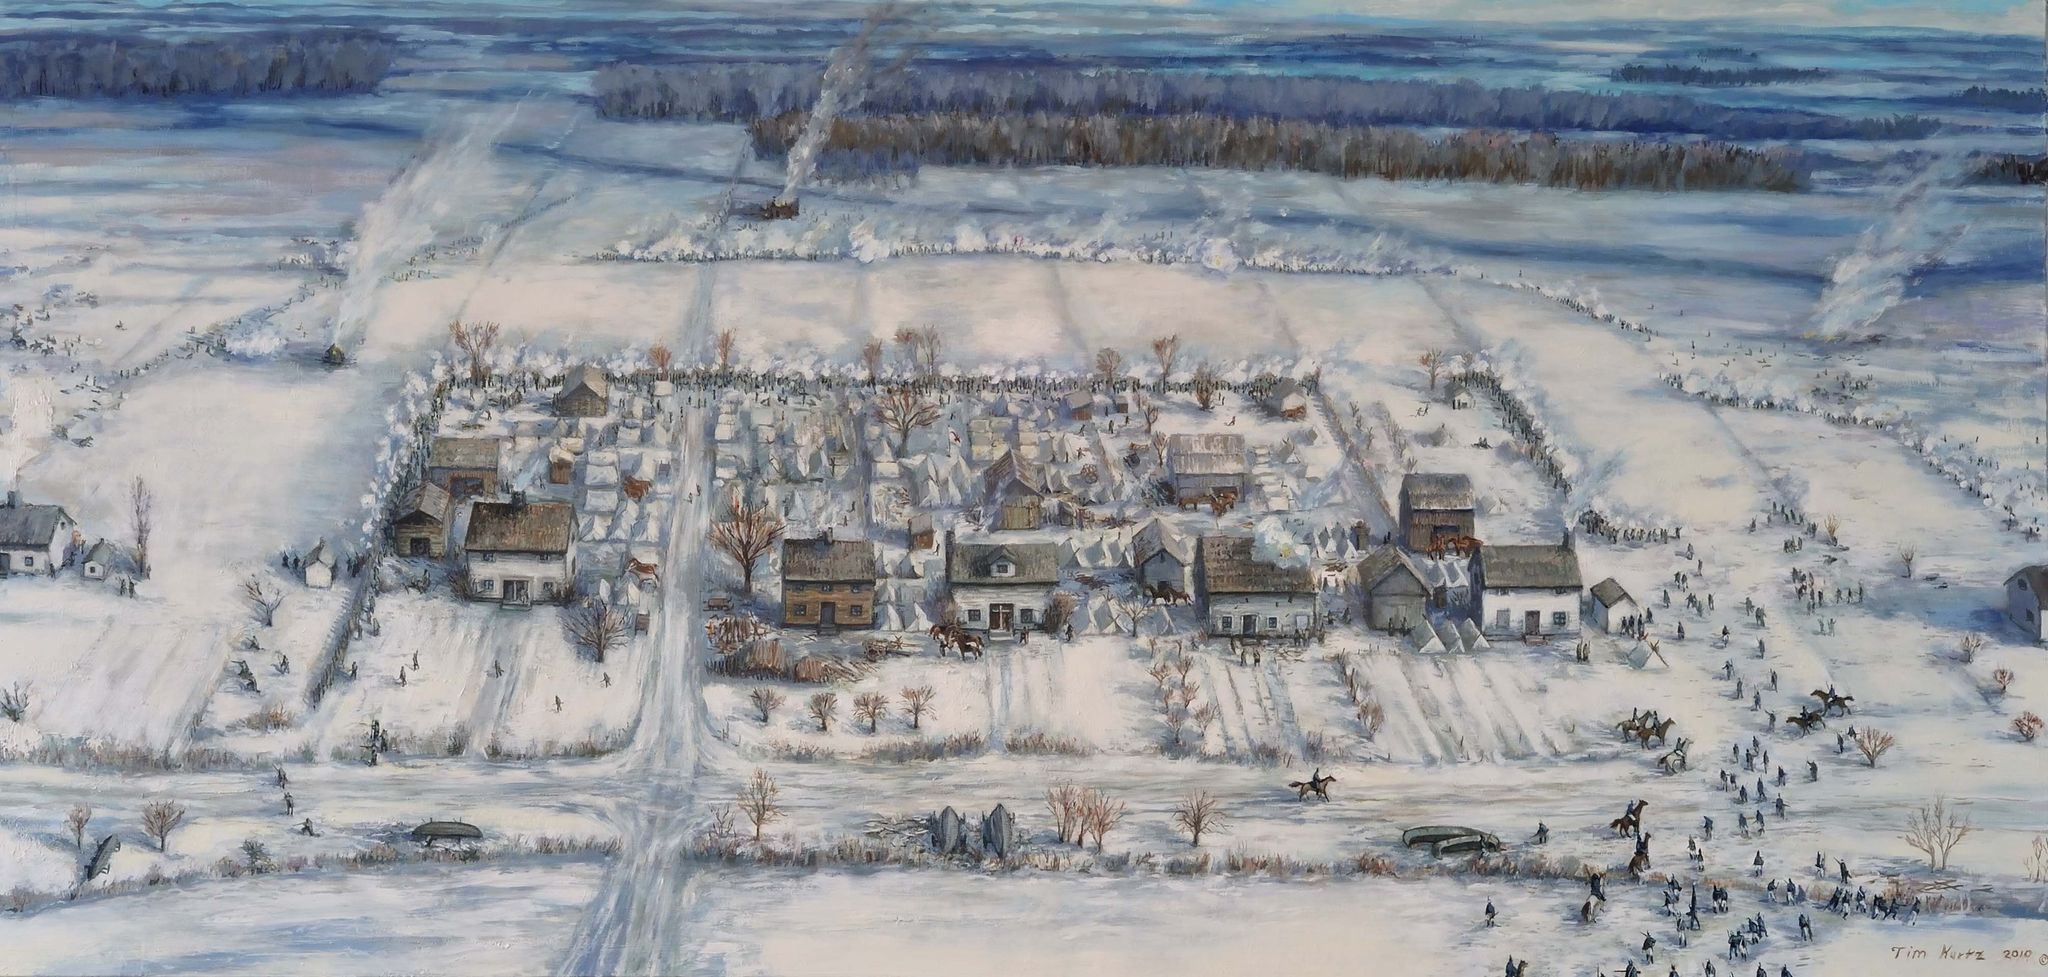 The January 22, 1813 Battle raging in the snowy village of Frenchtown